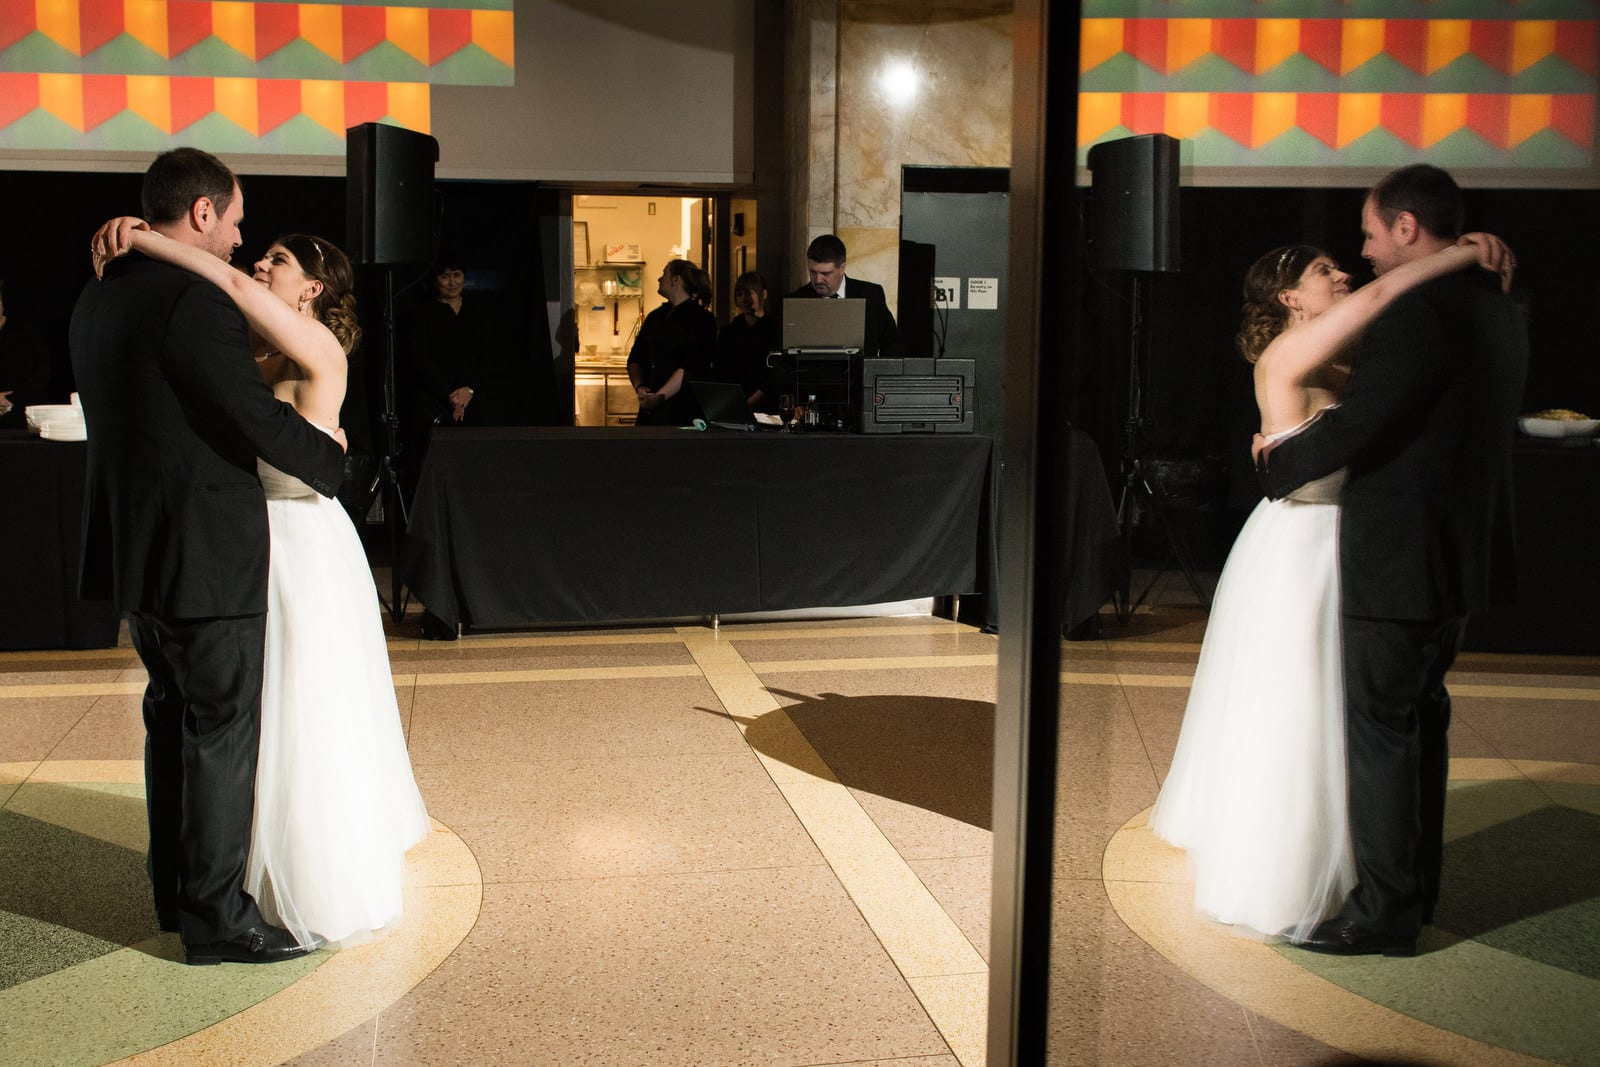 A bride and groom are reflected in a glass door as they have their first dance in the big red room at the Pittsburgh Children's Museum.